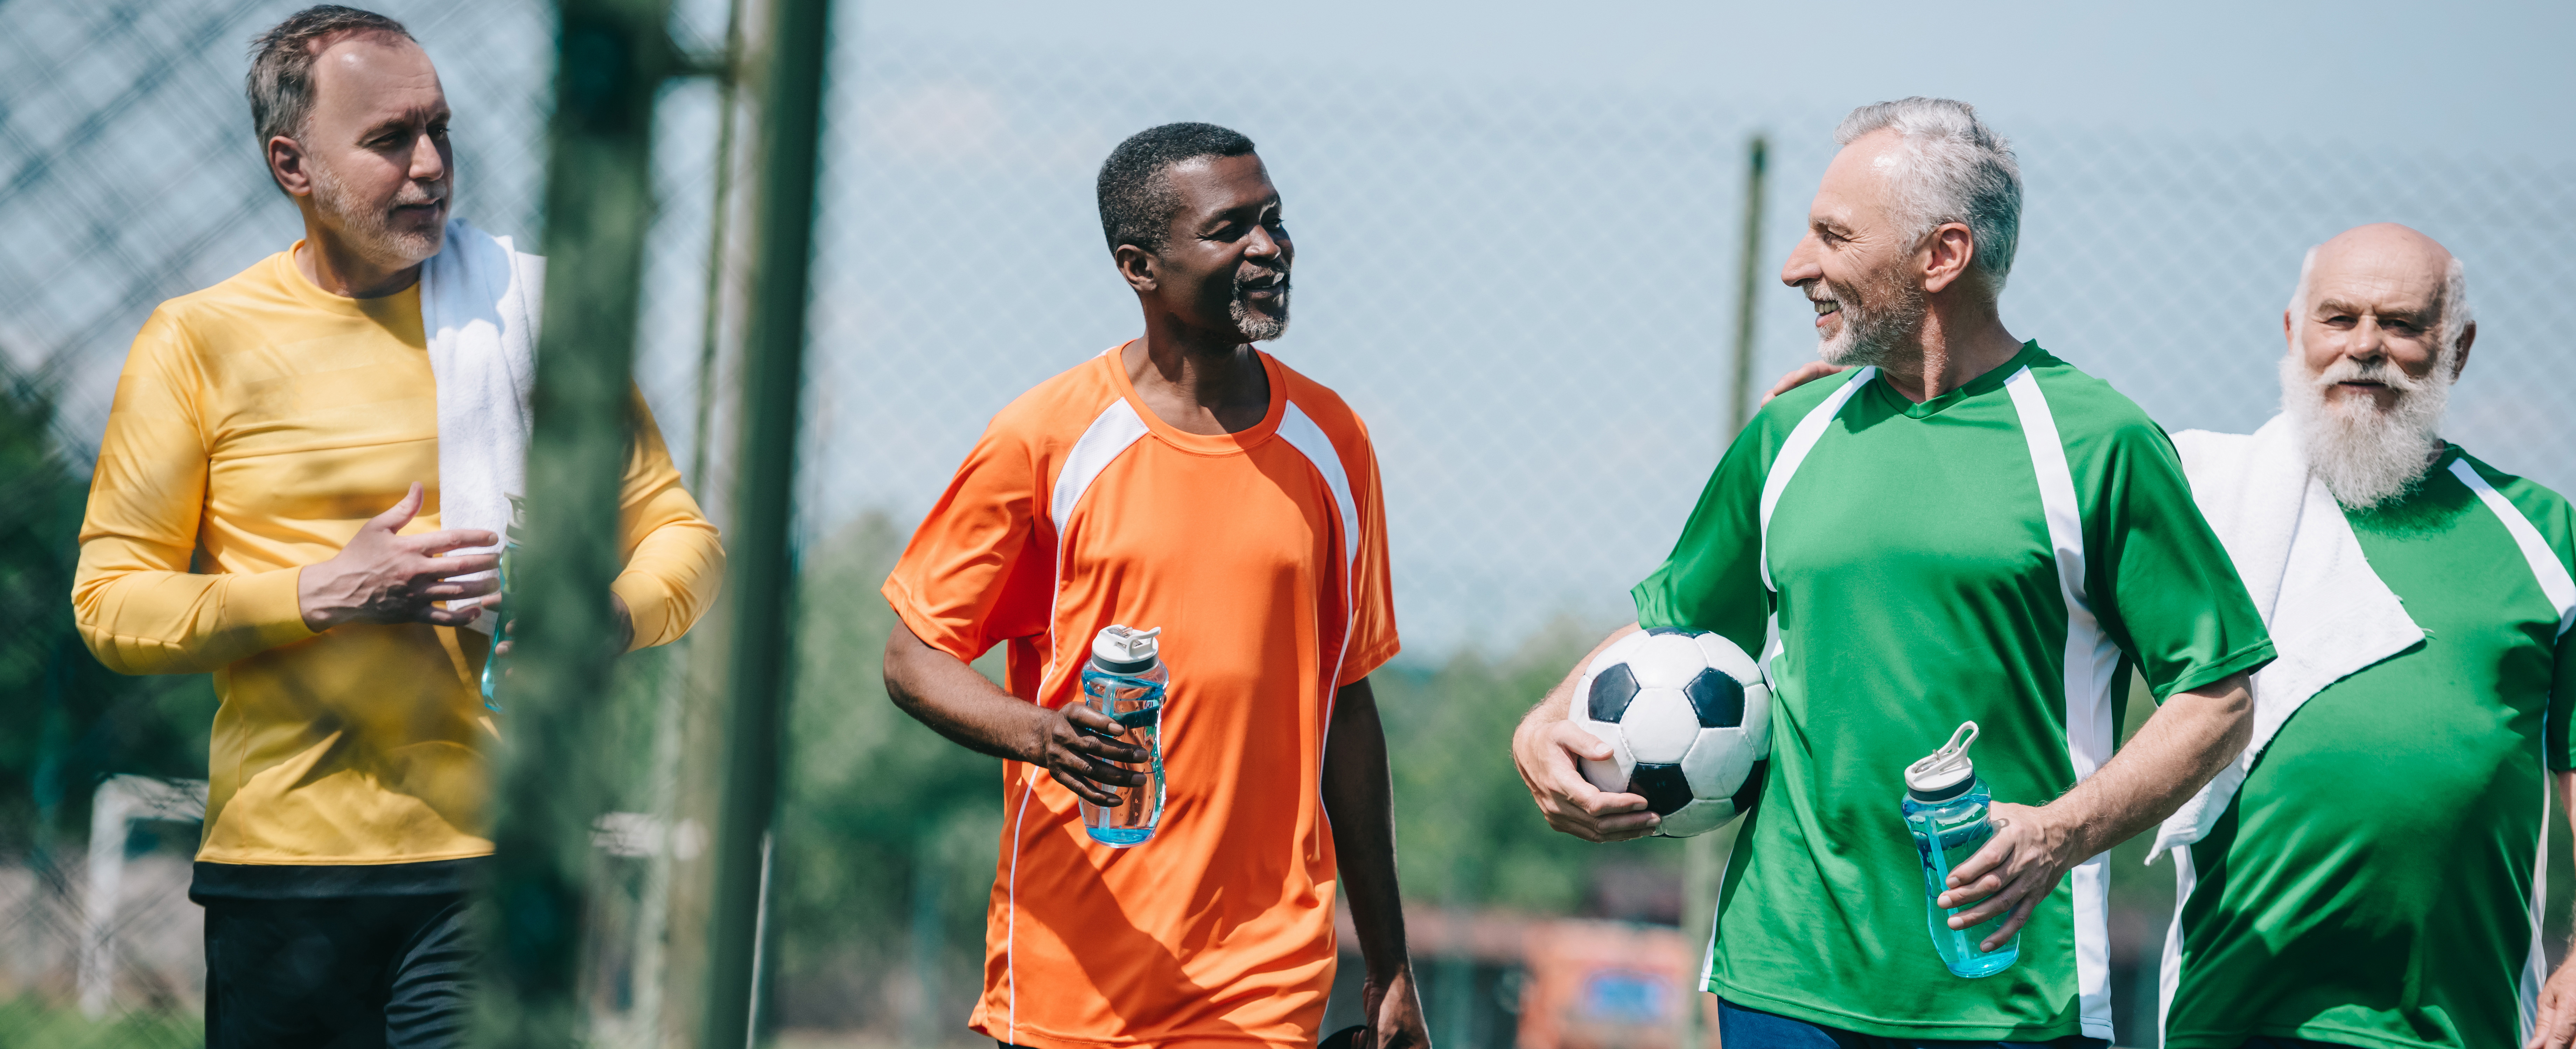 Walking Football is good for your physical and mental health